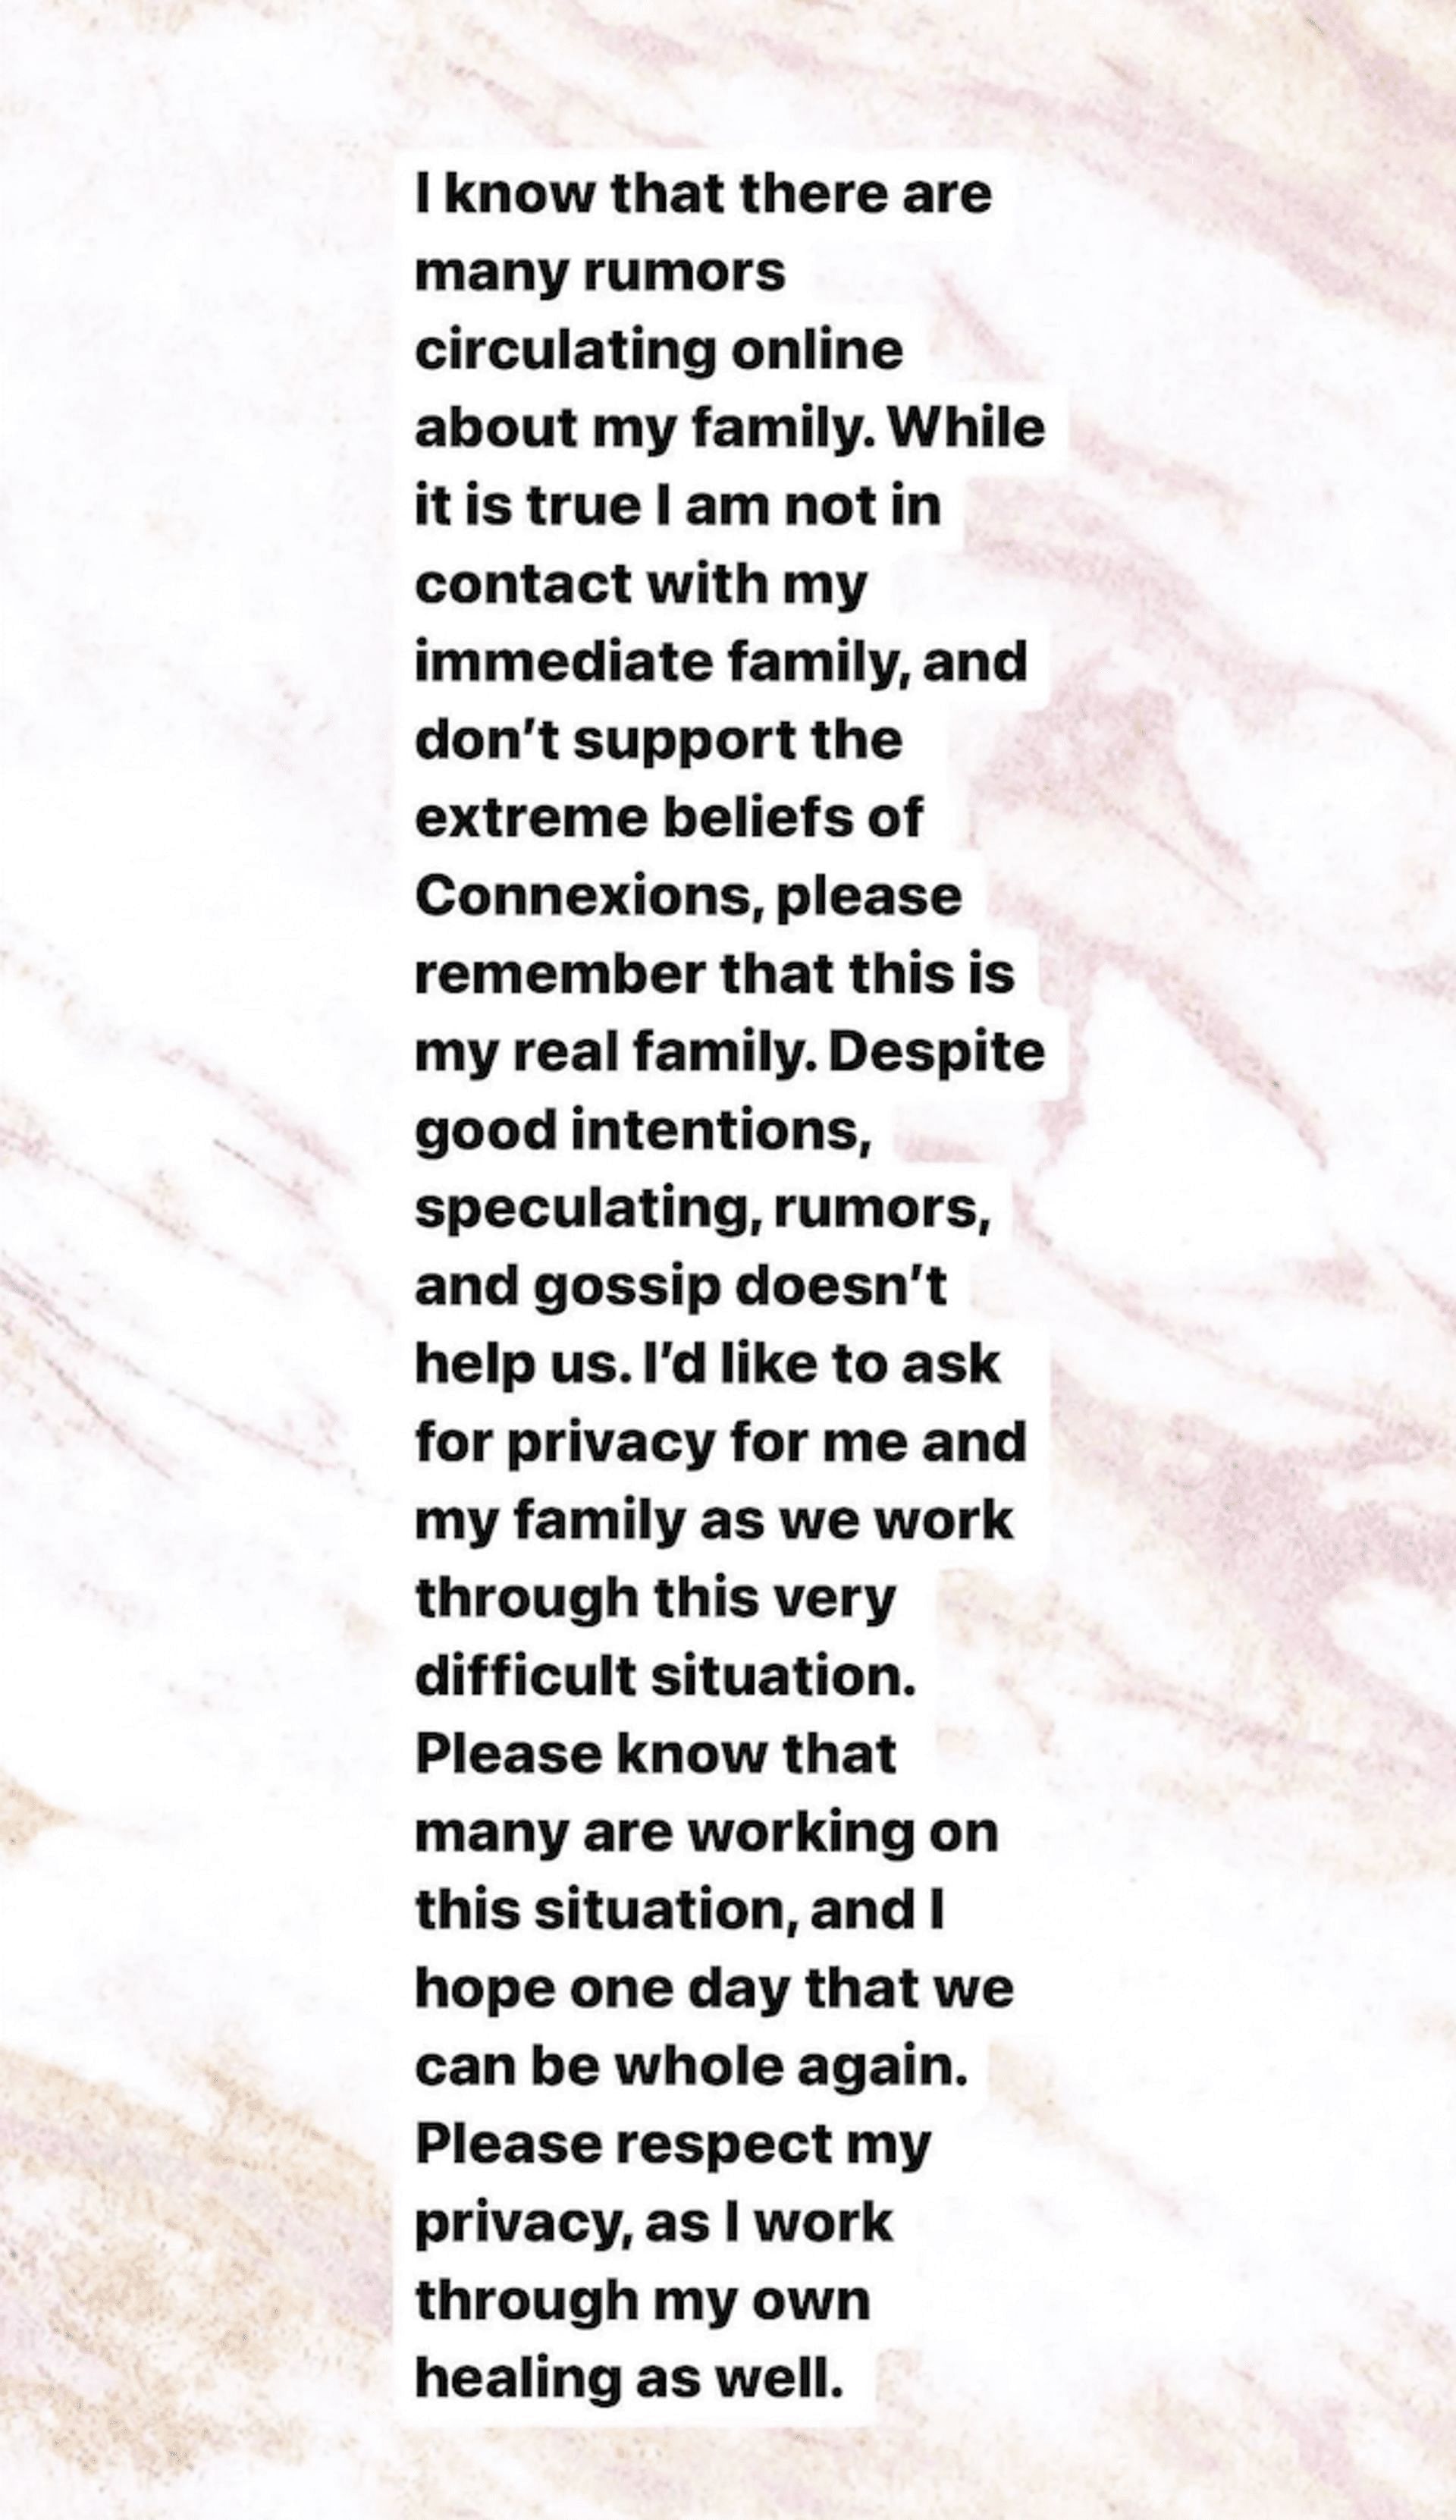 Shari Franke talks about her relationship with her parents through an Instagram story. (Image via Shari Franke/ Instagram)